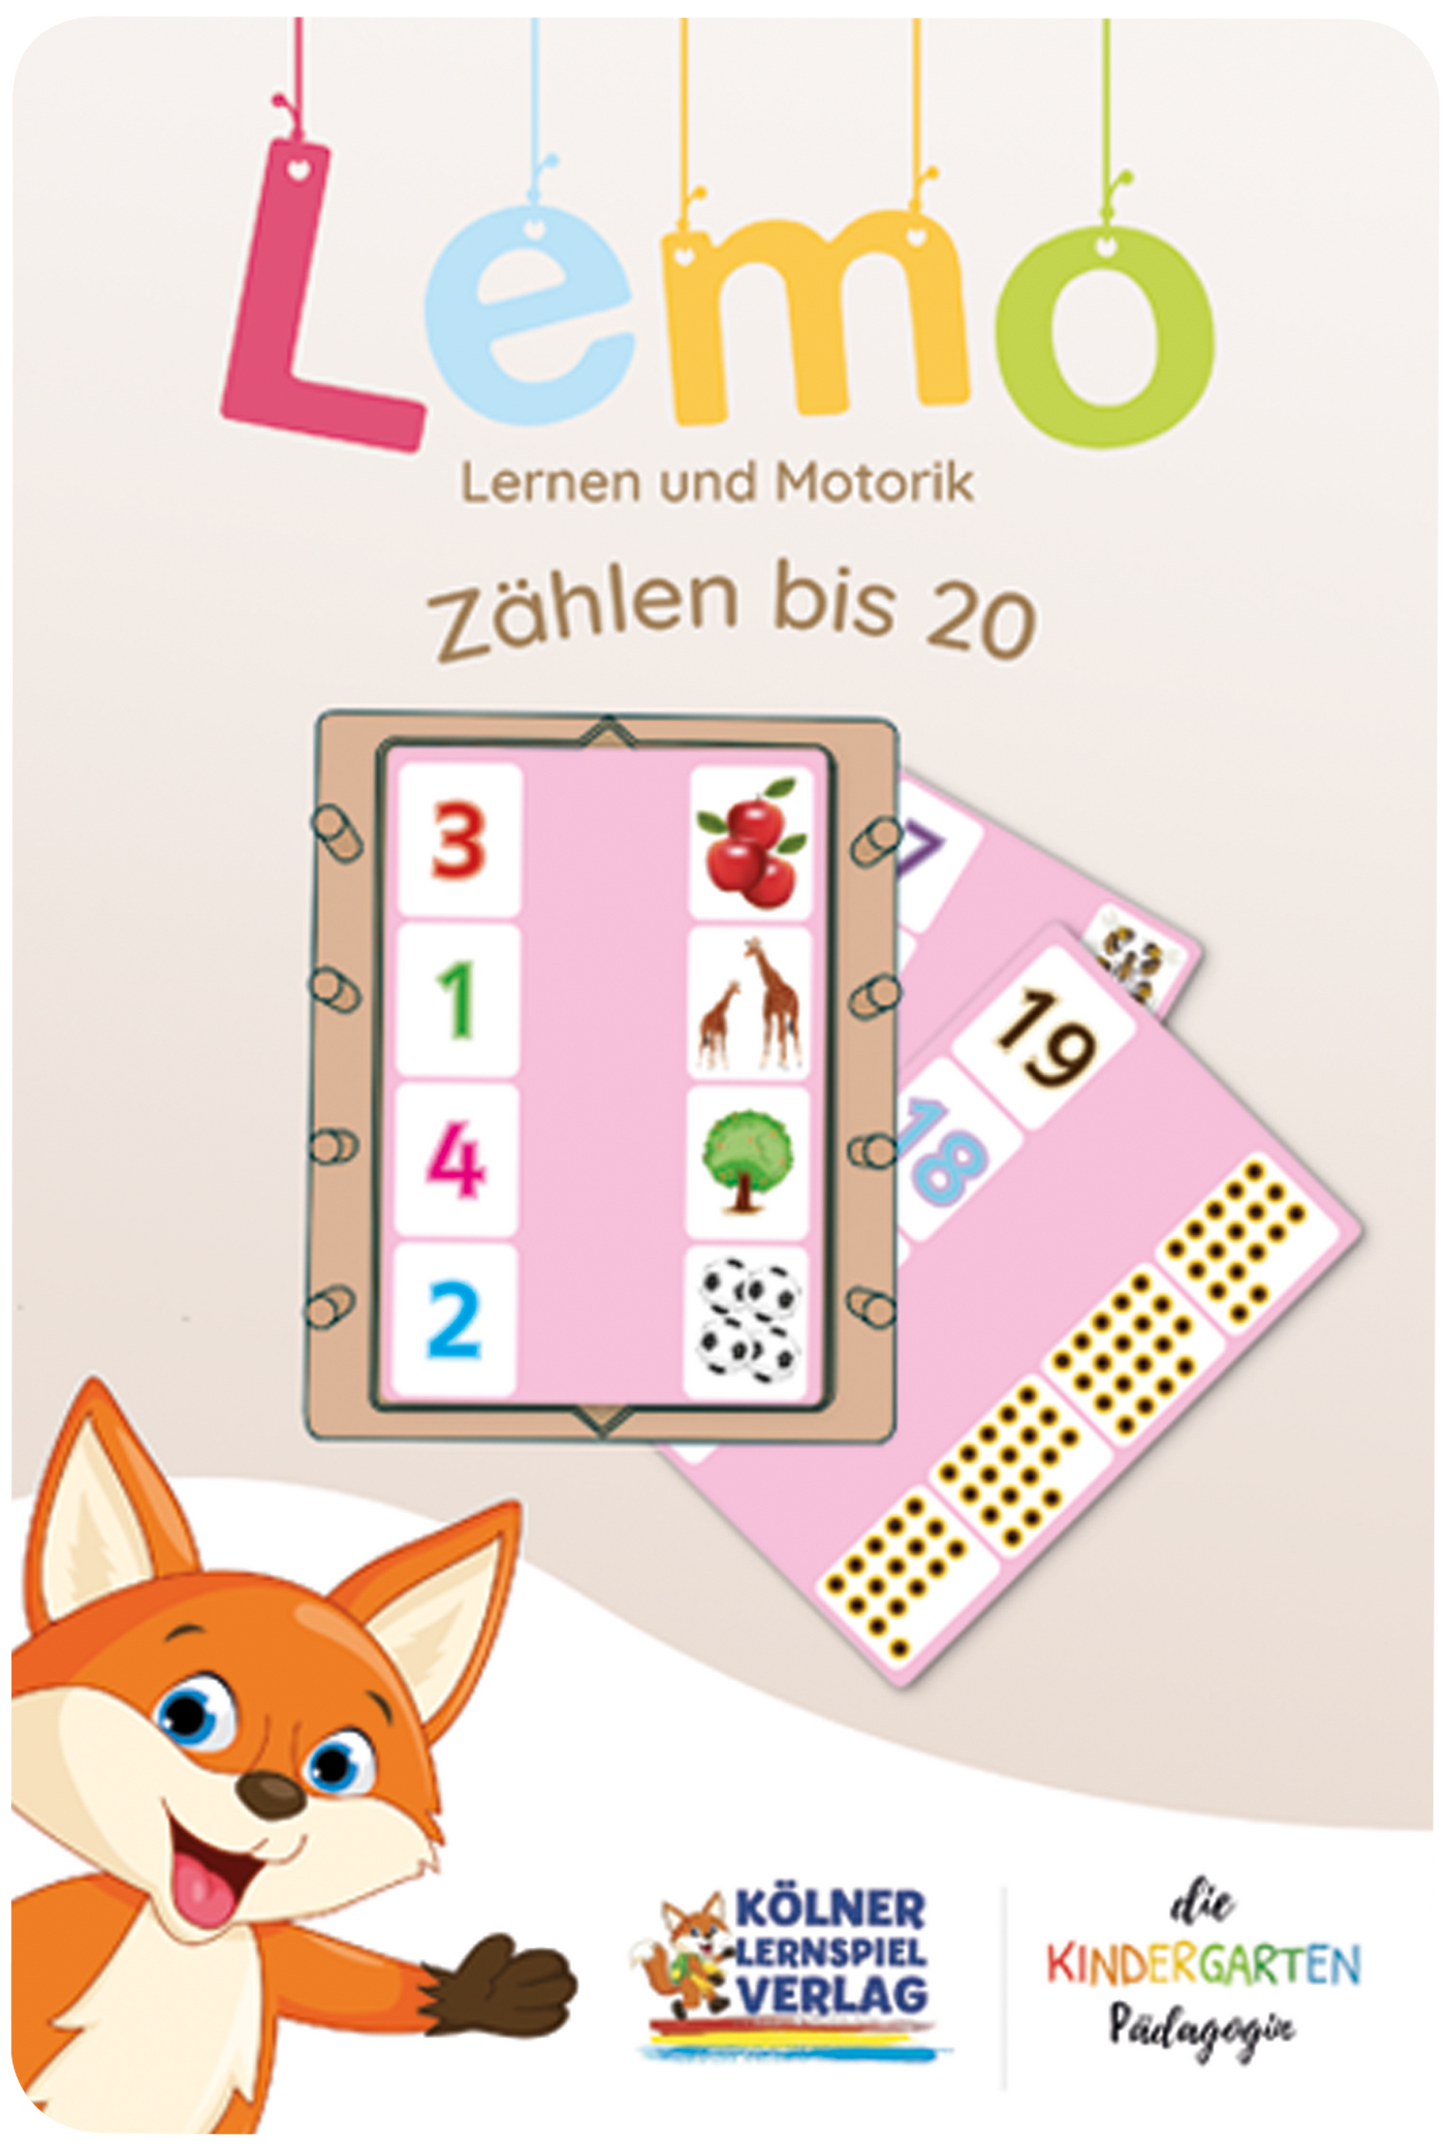 Lemo deck of cards counting to 20